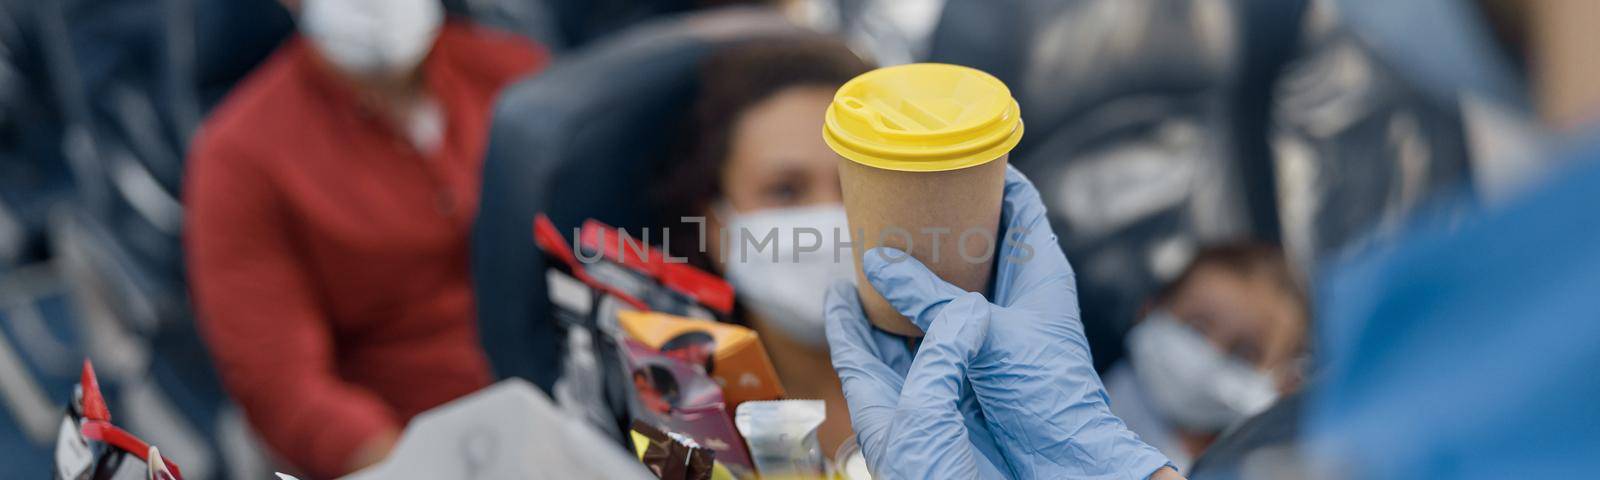 Close up shot of hands in protective gloves of flight attendant serving drinks to passengers on board. Traveling by airplane during Covid19 pandemic by Yaroslav_astakhov